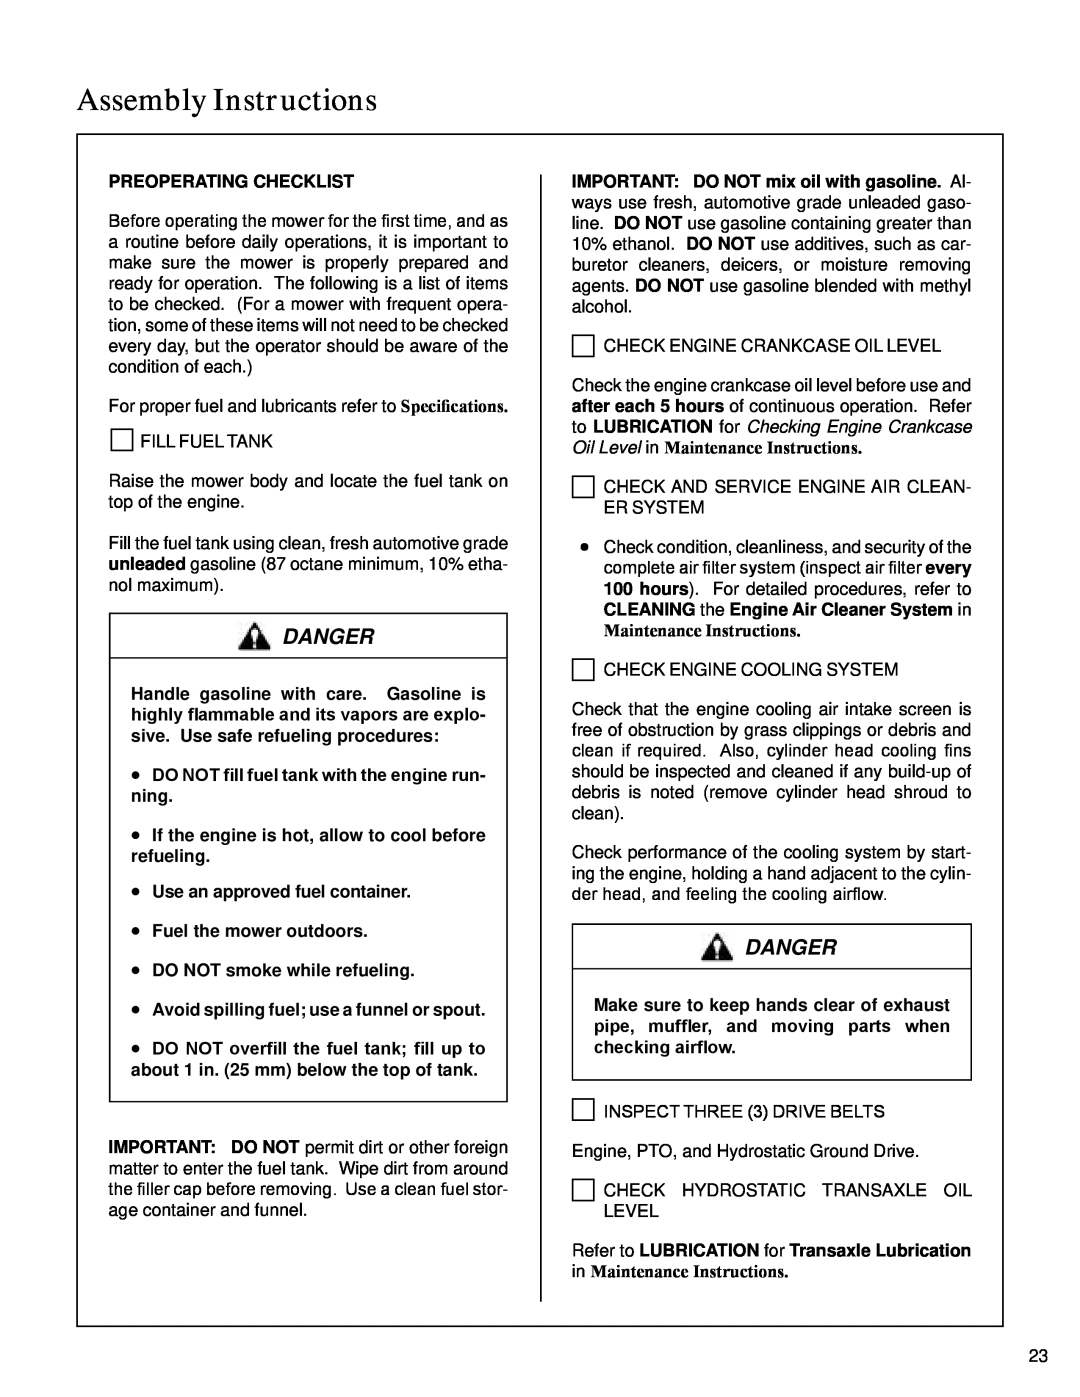 Walker S14 manual Preoperating Checklist, •DO NOT fill fuel tank with the engine run- ning, •Use an approved fuel container 